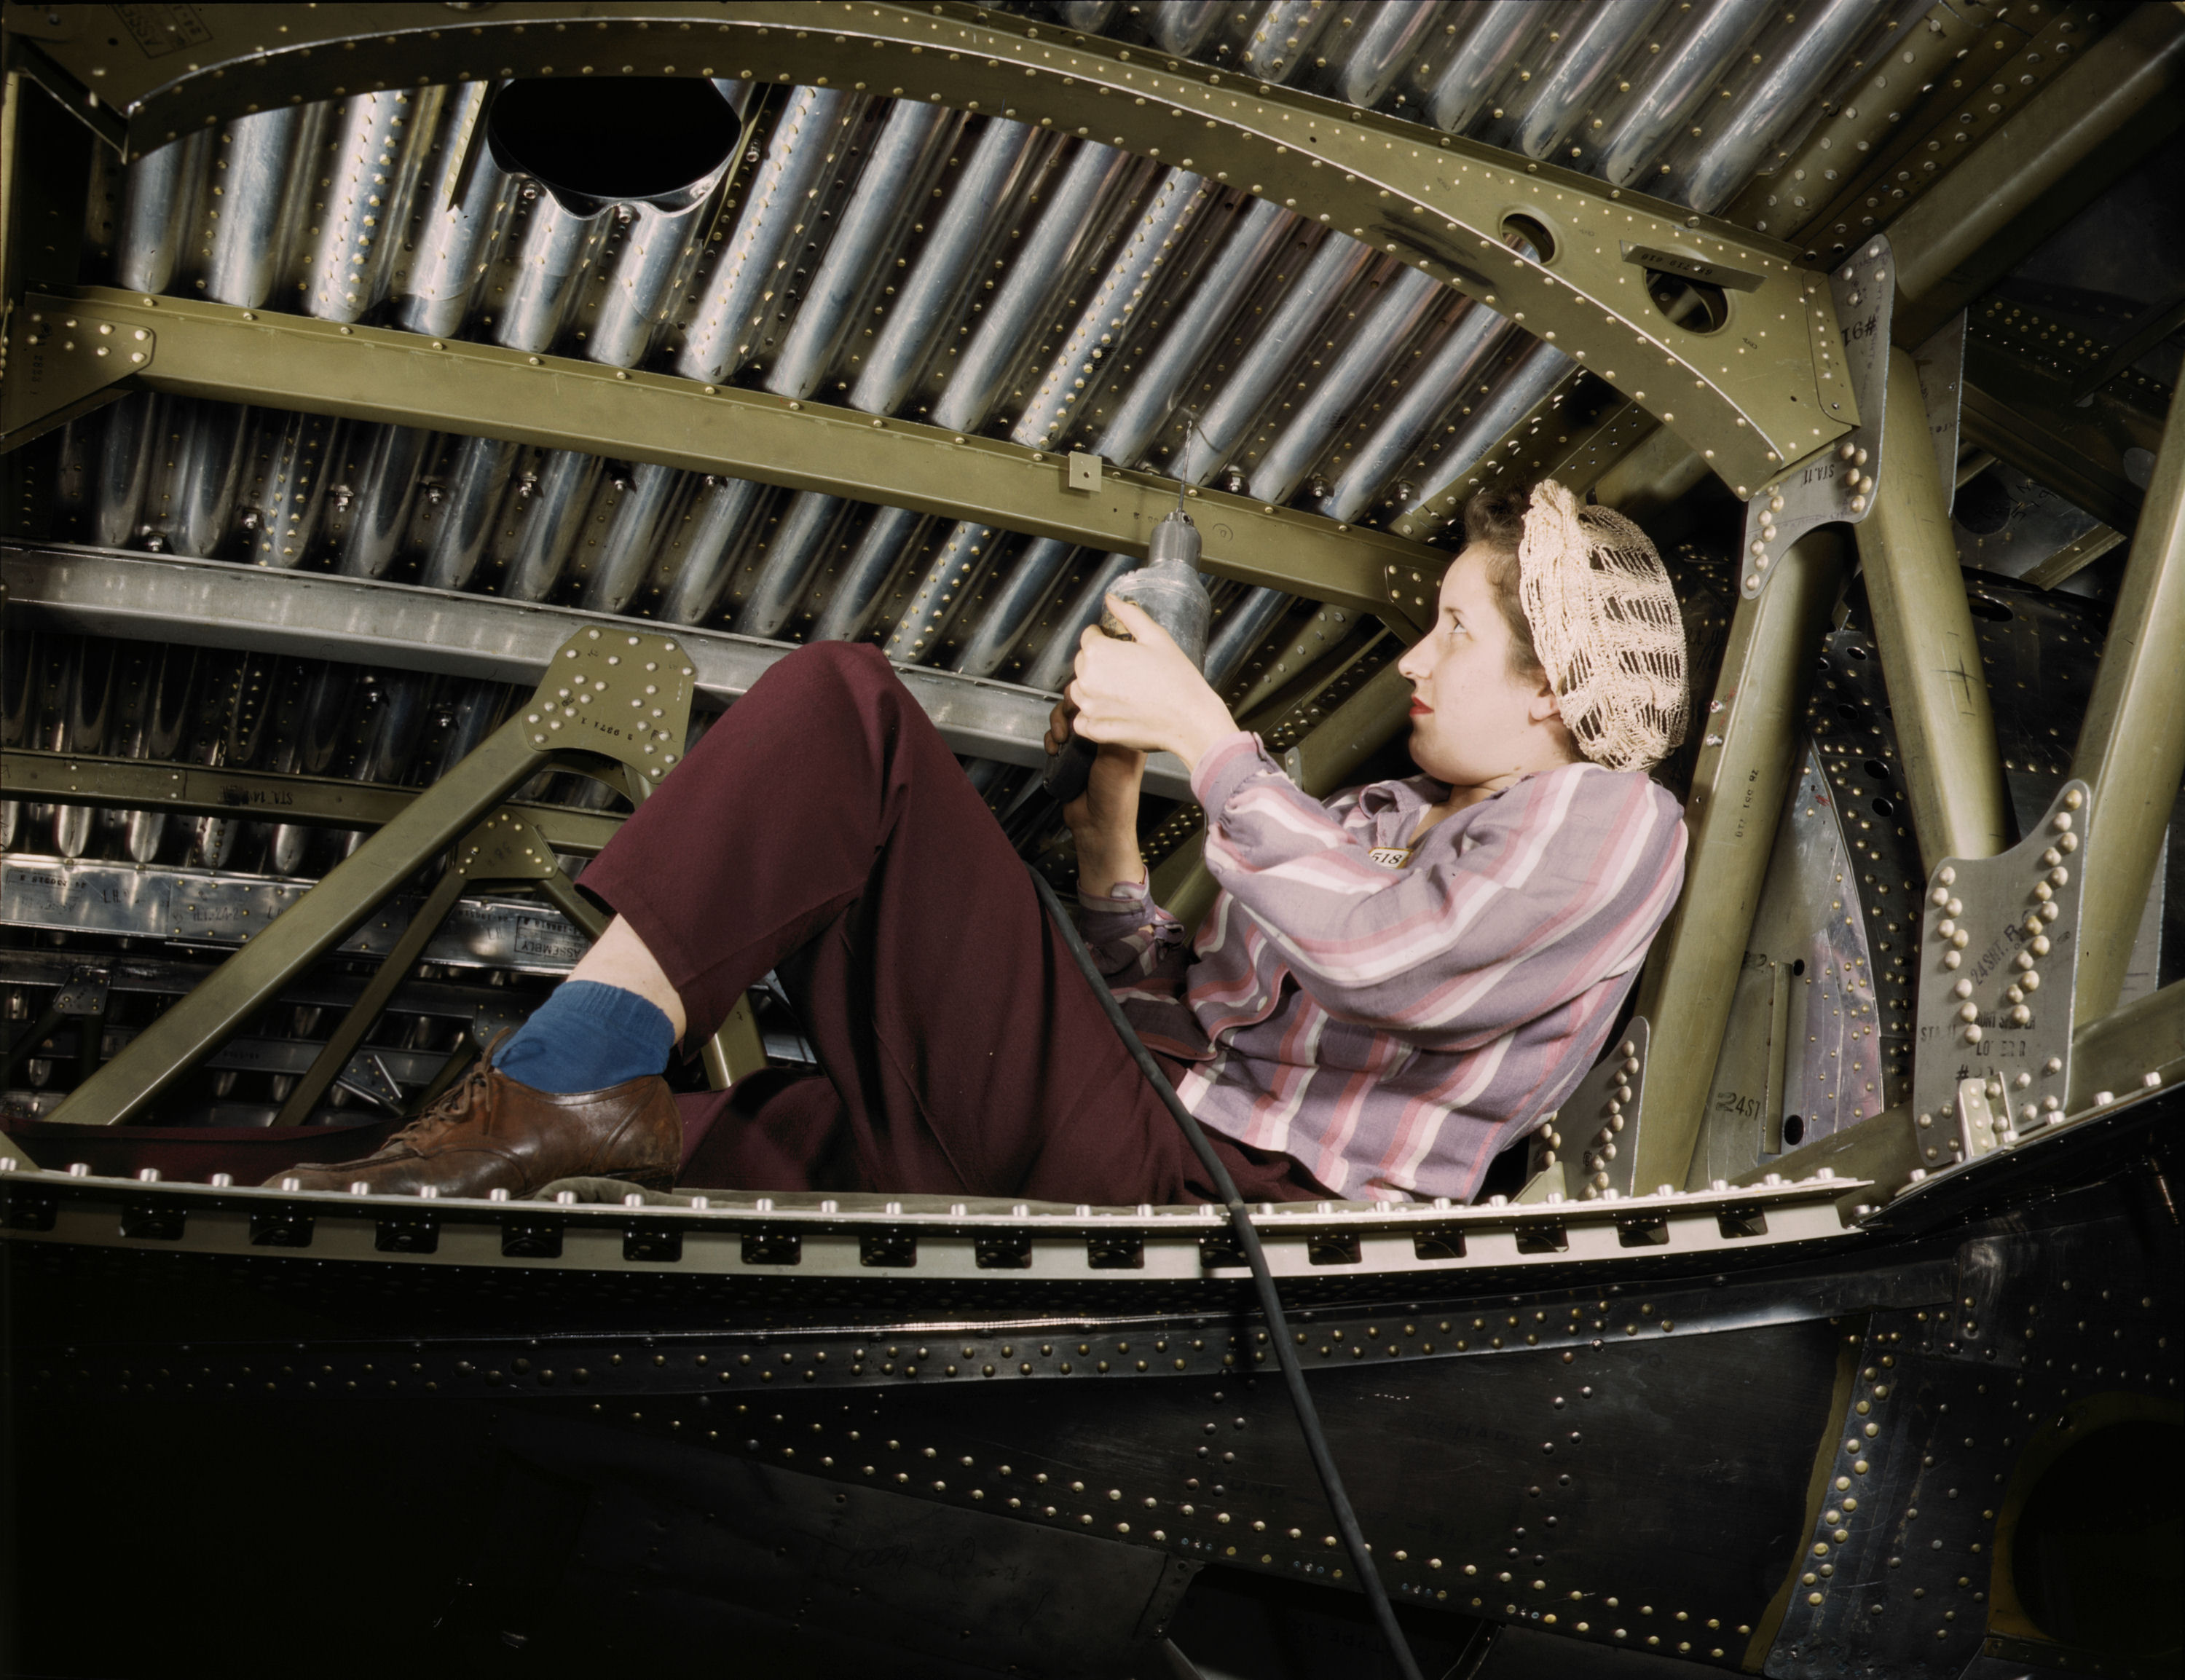 A-20 Bomber Being Riveted by Woman Worker